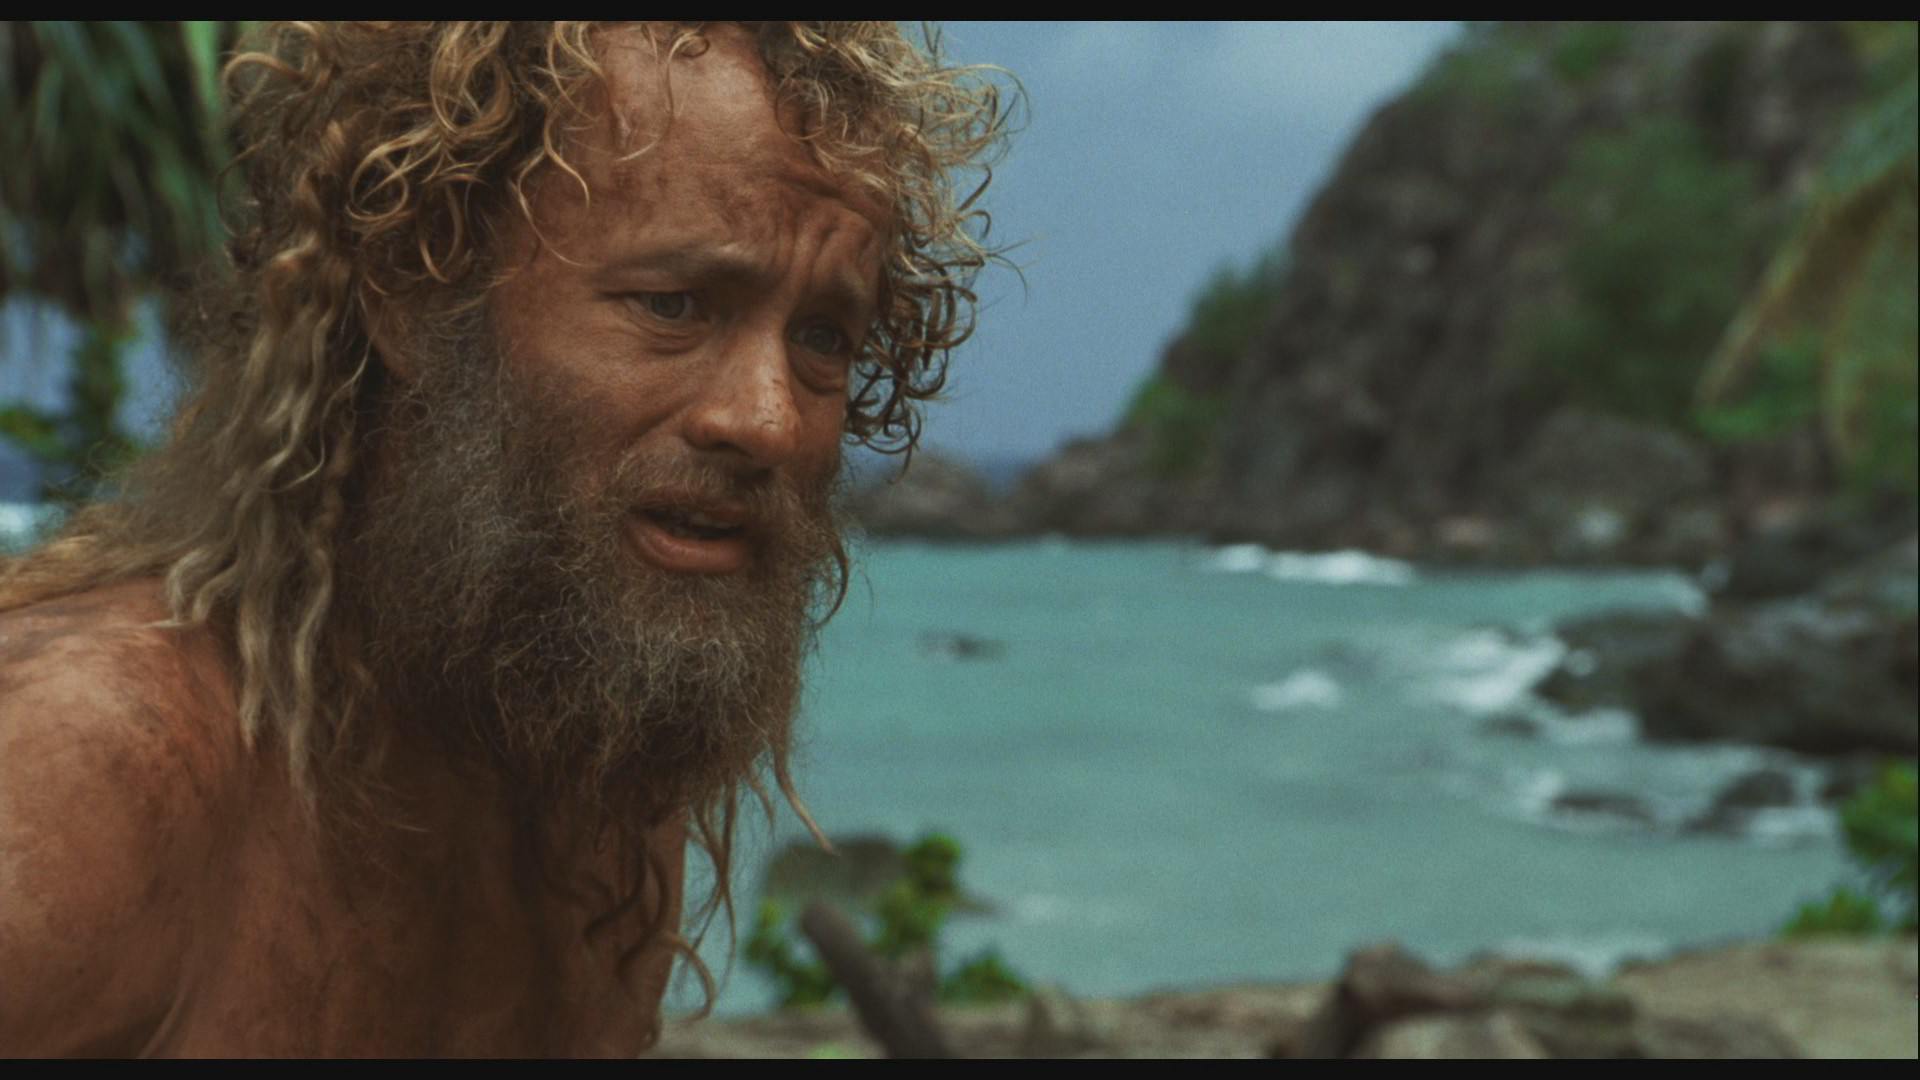 movie review about cast away